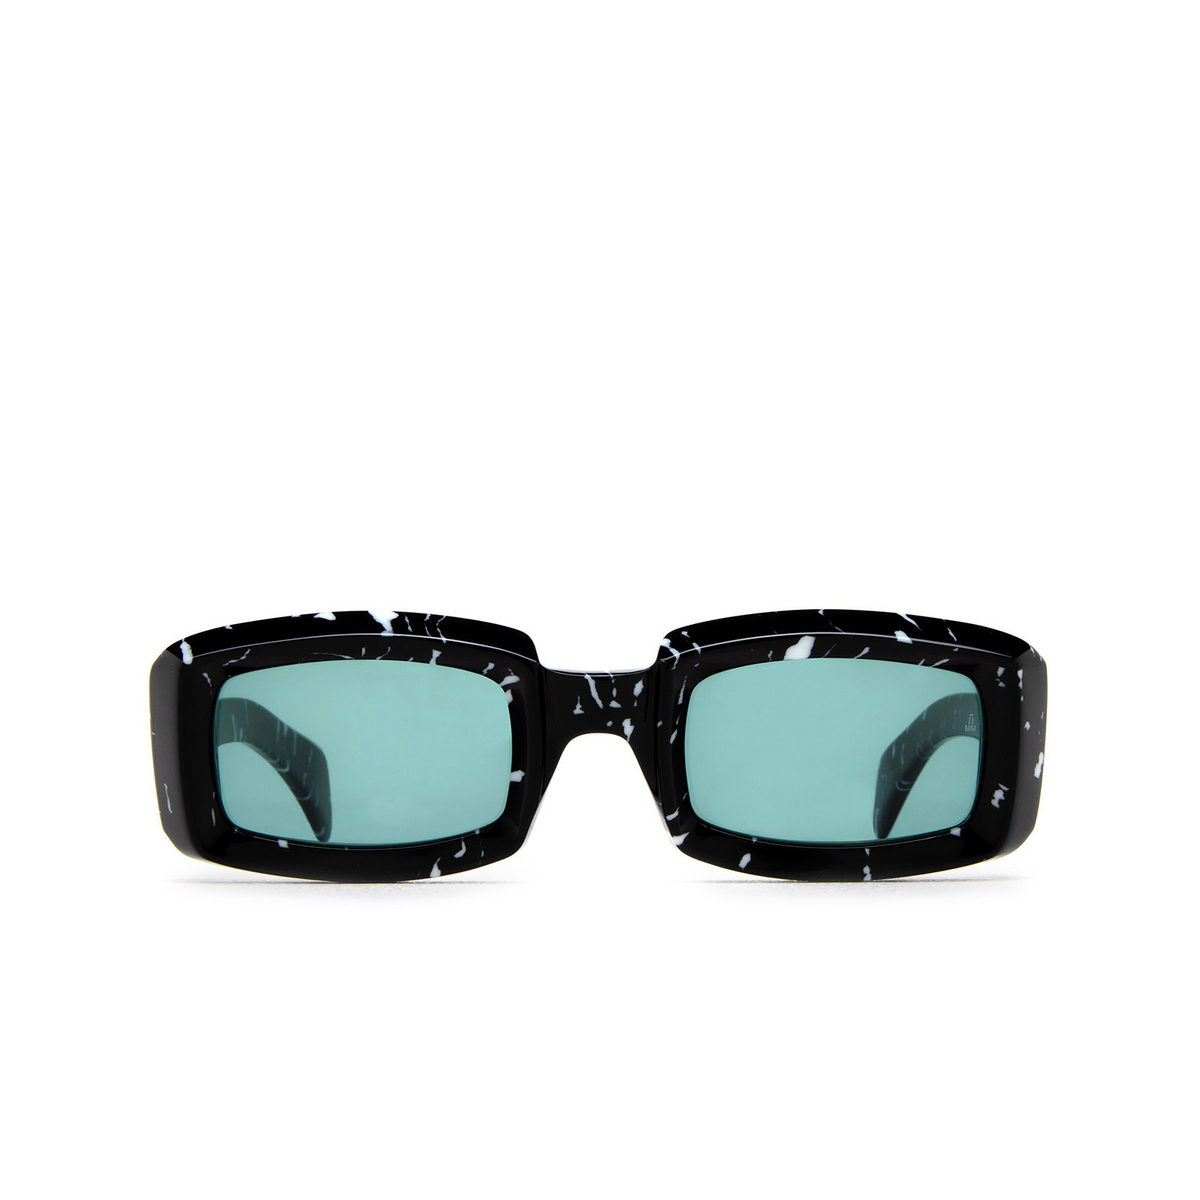 Jacques Marie Mage RUNAWAY Sunglasses BLACK MARBLE - front view